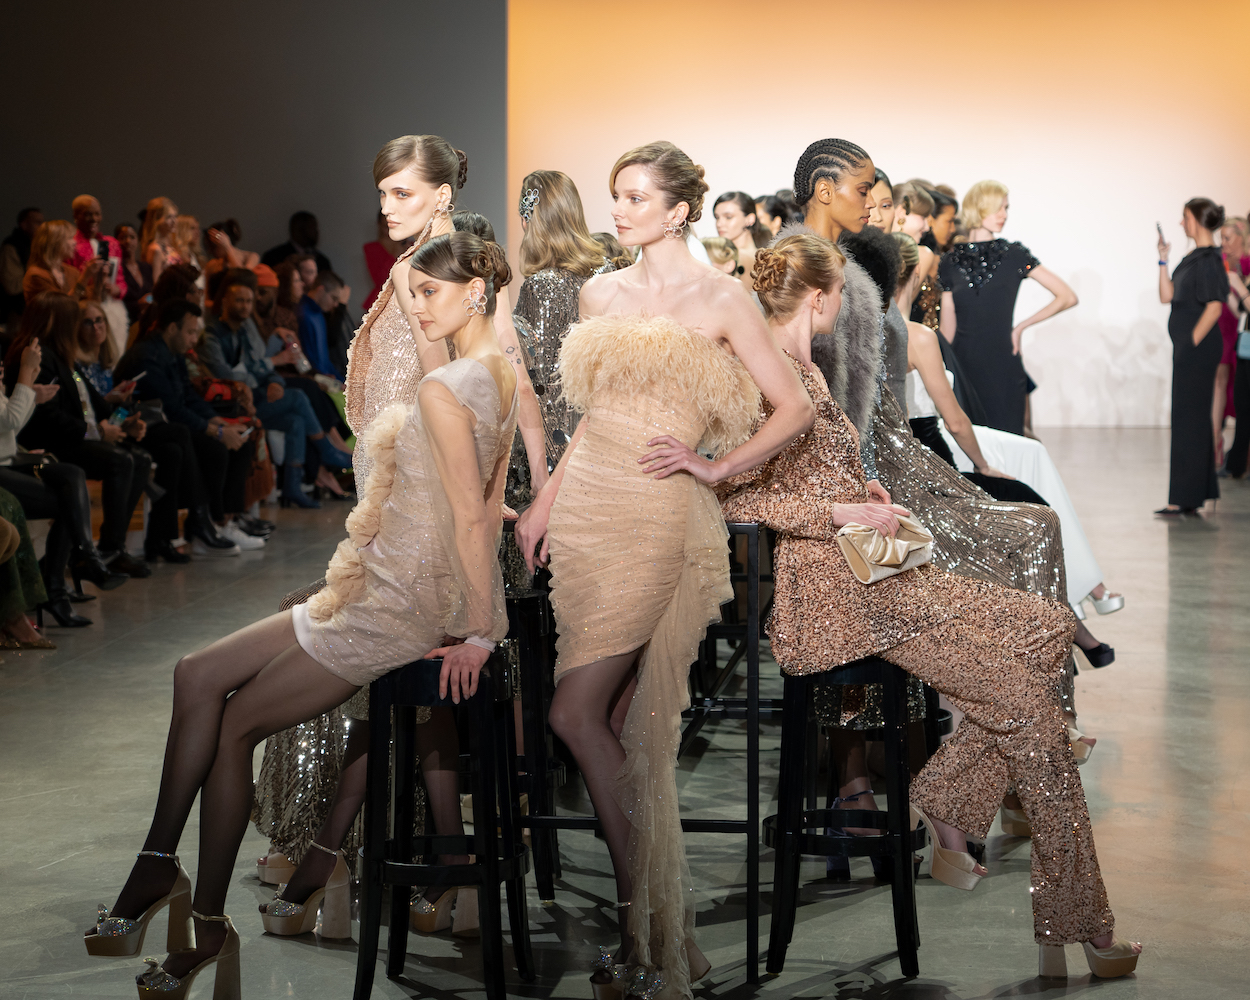 The end of the Badgley Mischka show, when all the models came out on the runway to present the collection.